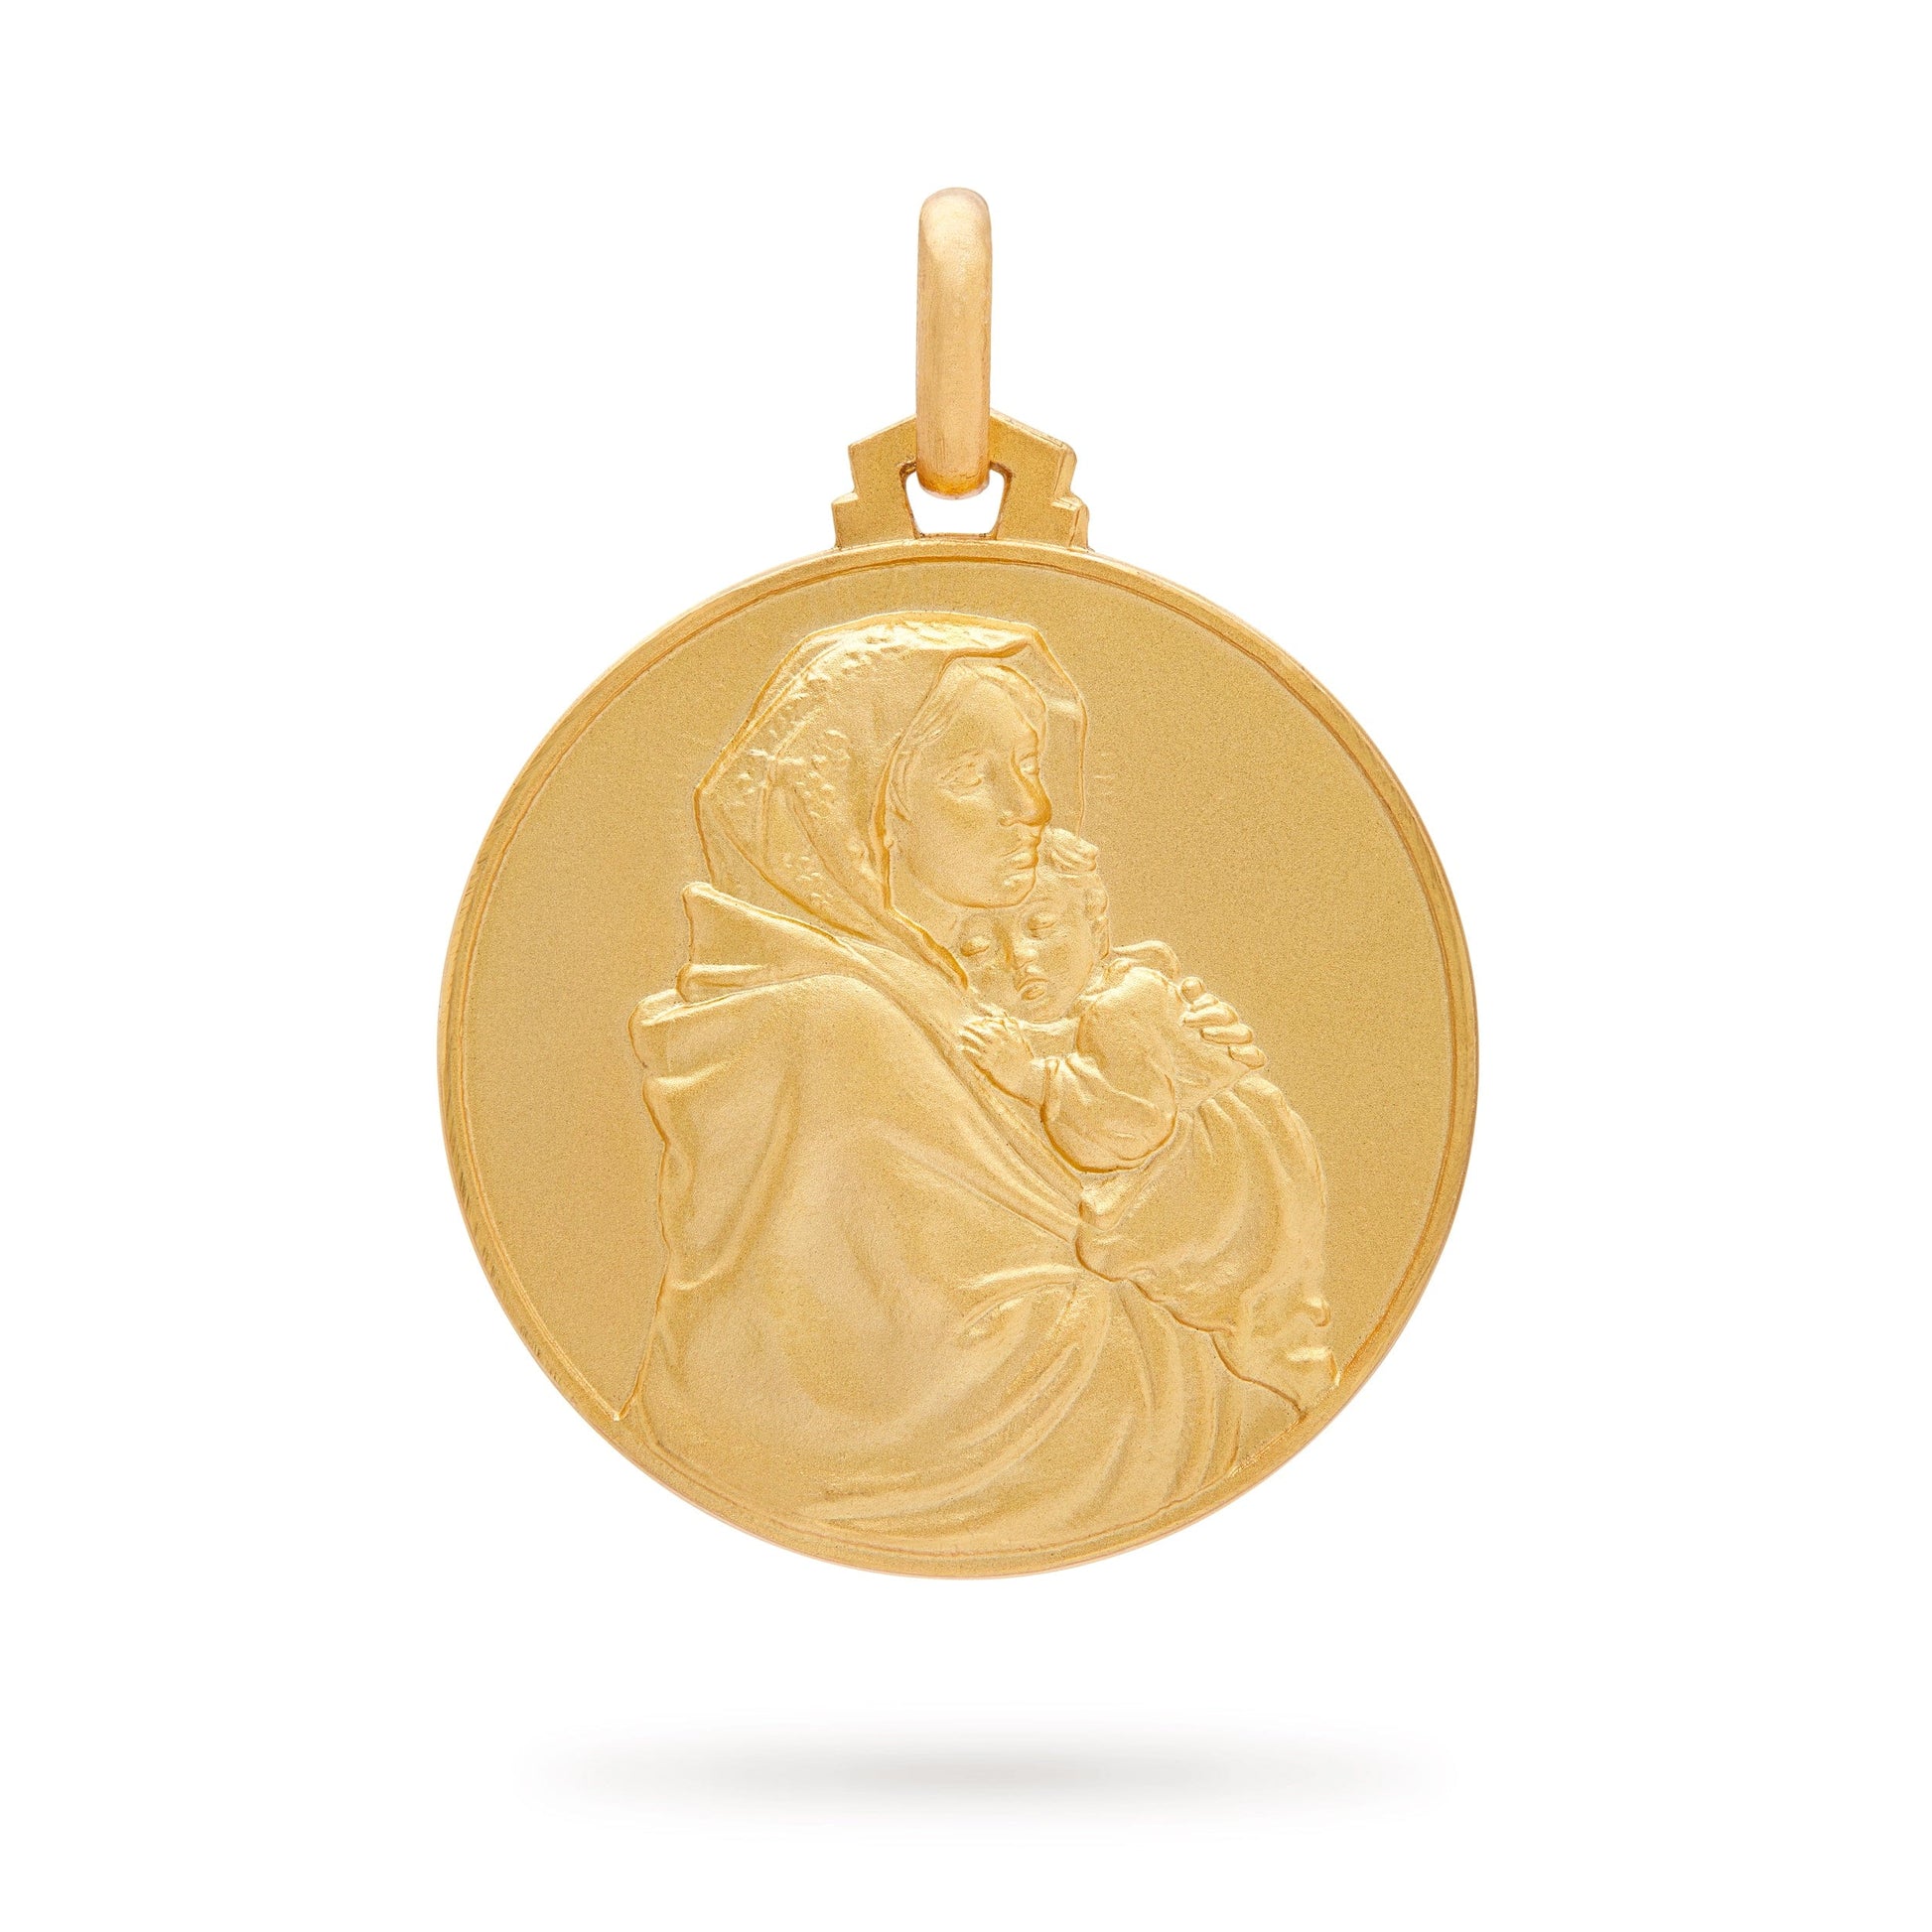 MONDO CATTOLICO Jewelry Madonna of the Streets Gold Medal